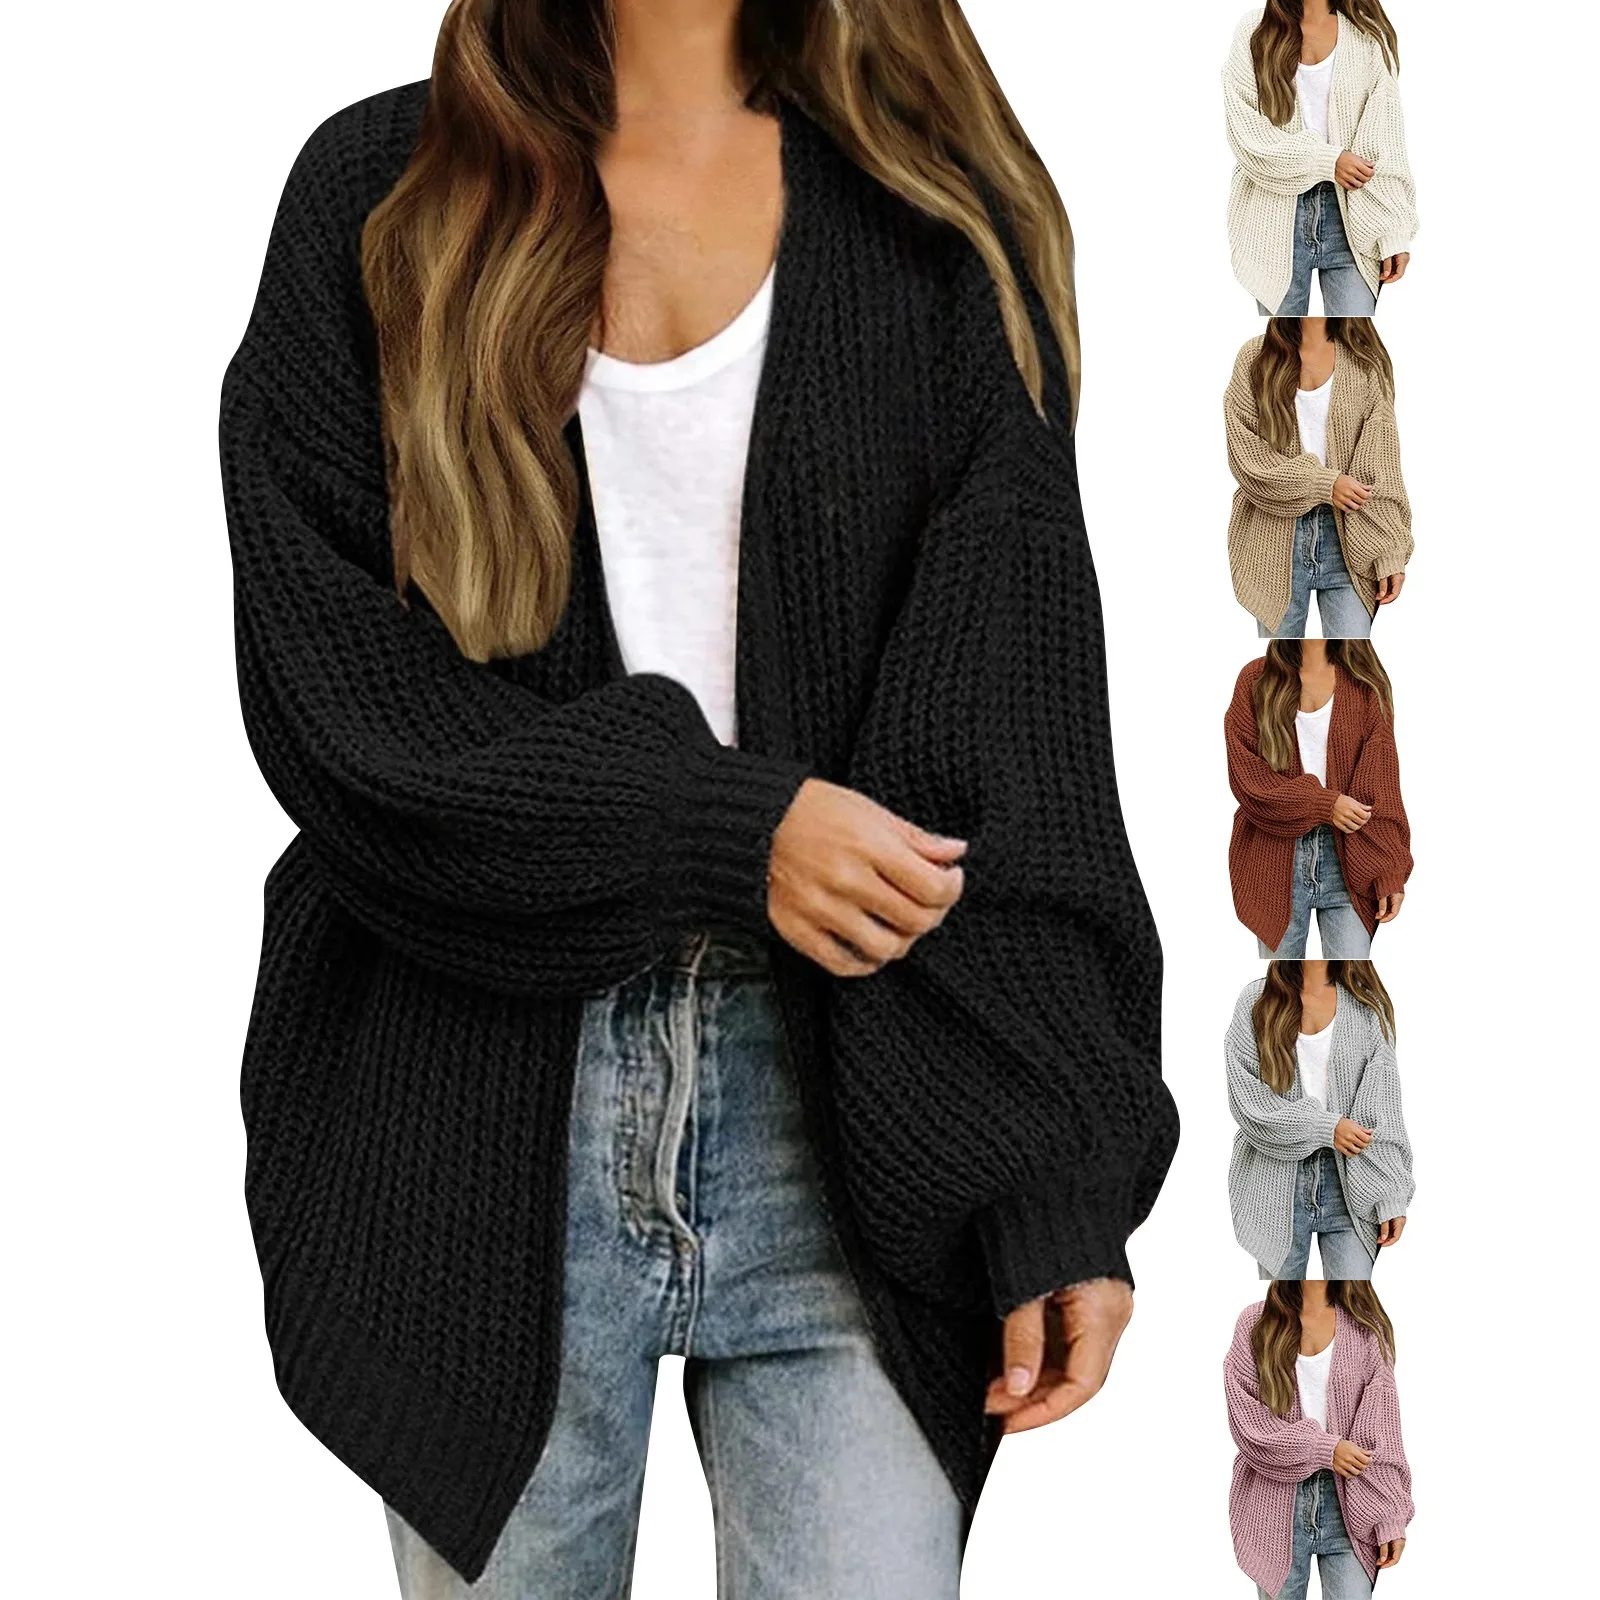 

Women's Long Sleeved Sleeved Cardigan With Pockets Knitted Sweater For Swim Tops for Women 3x Women's Tunic Blouses